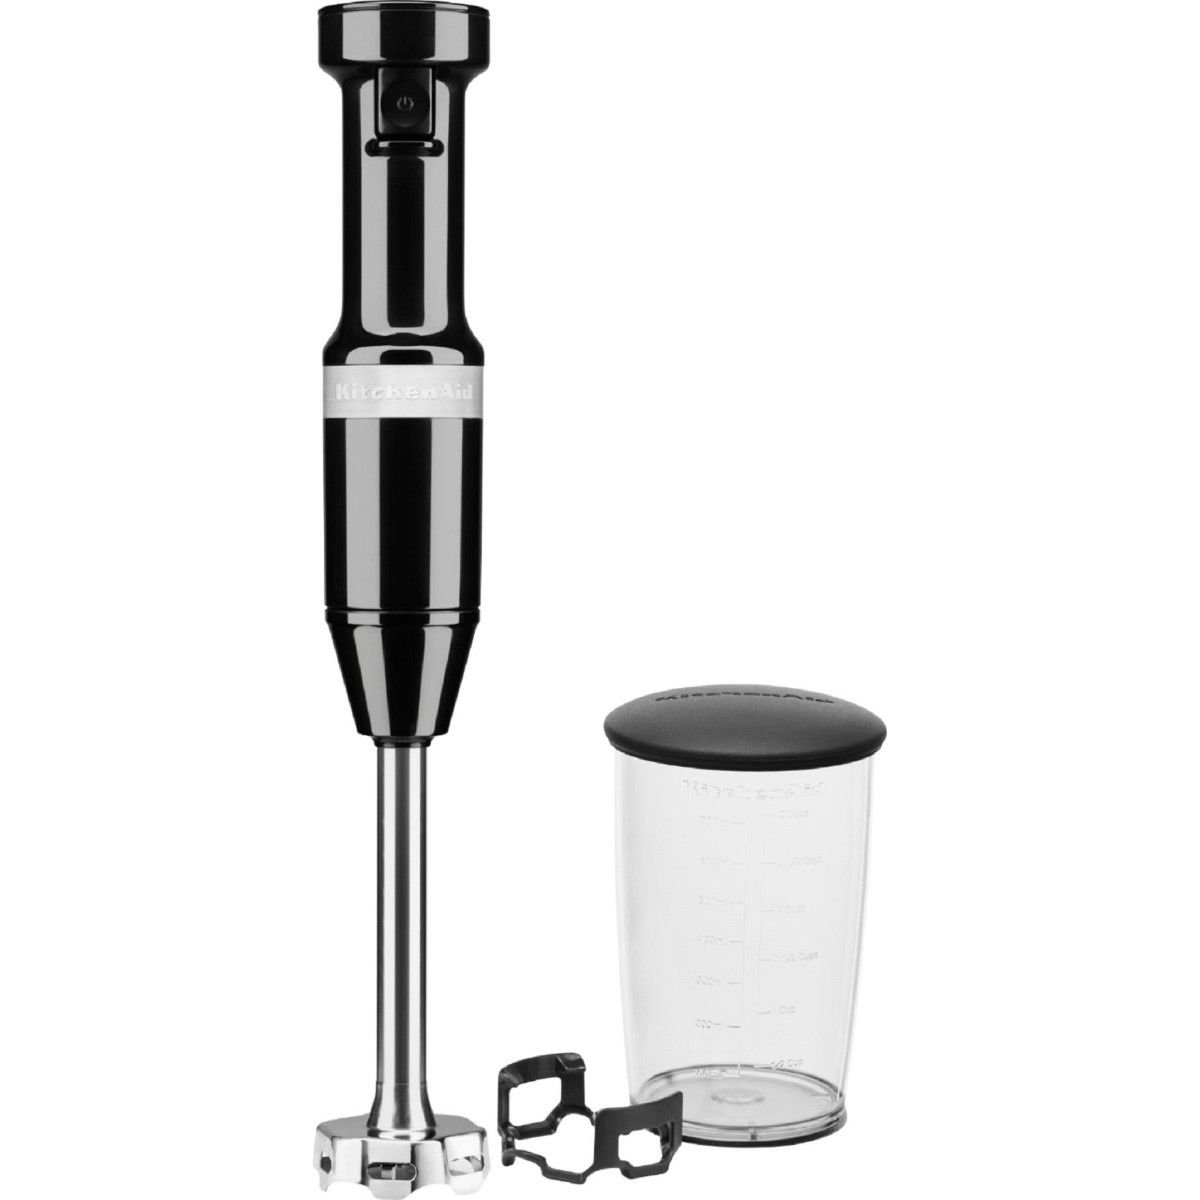 Cuisinart Immersion Hand Blender with Storage Case (Factory Refurbished)